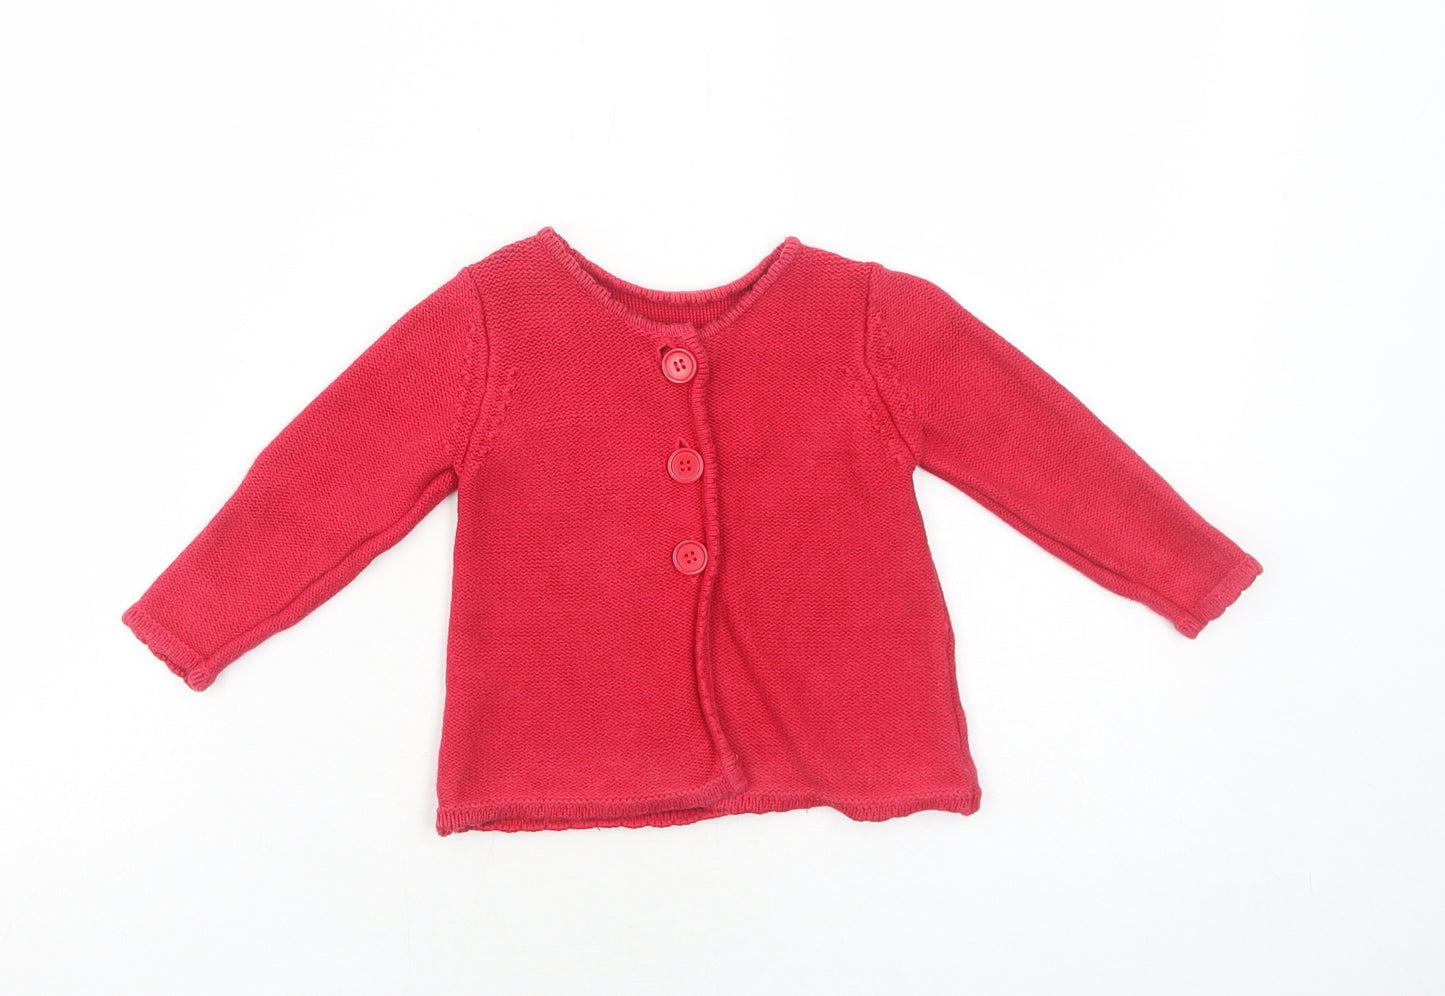 Mothercare Girls Red Cotton Cardigan Jumper Size 12-18 Months Button